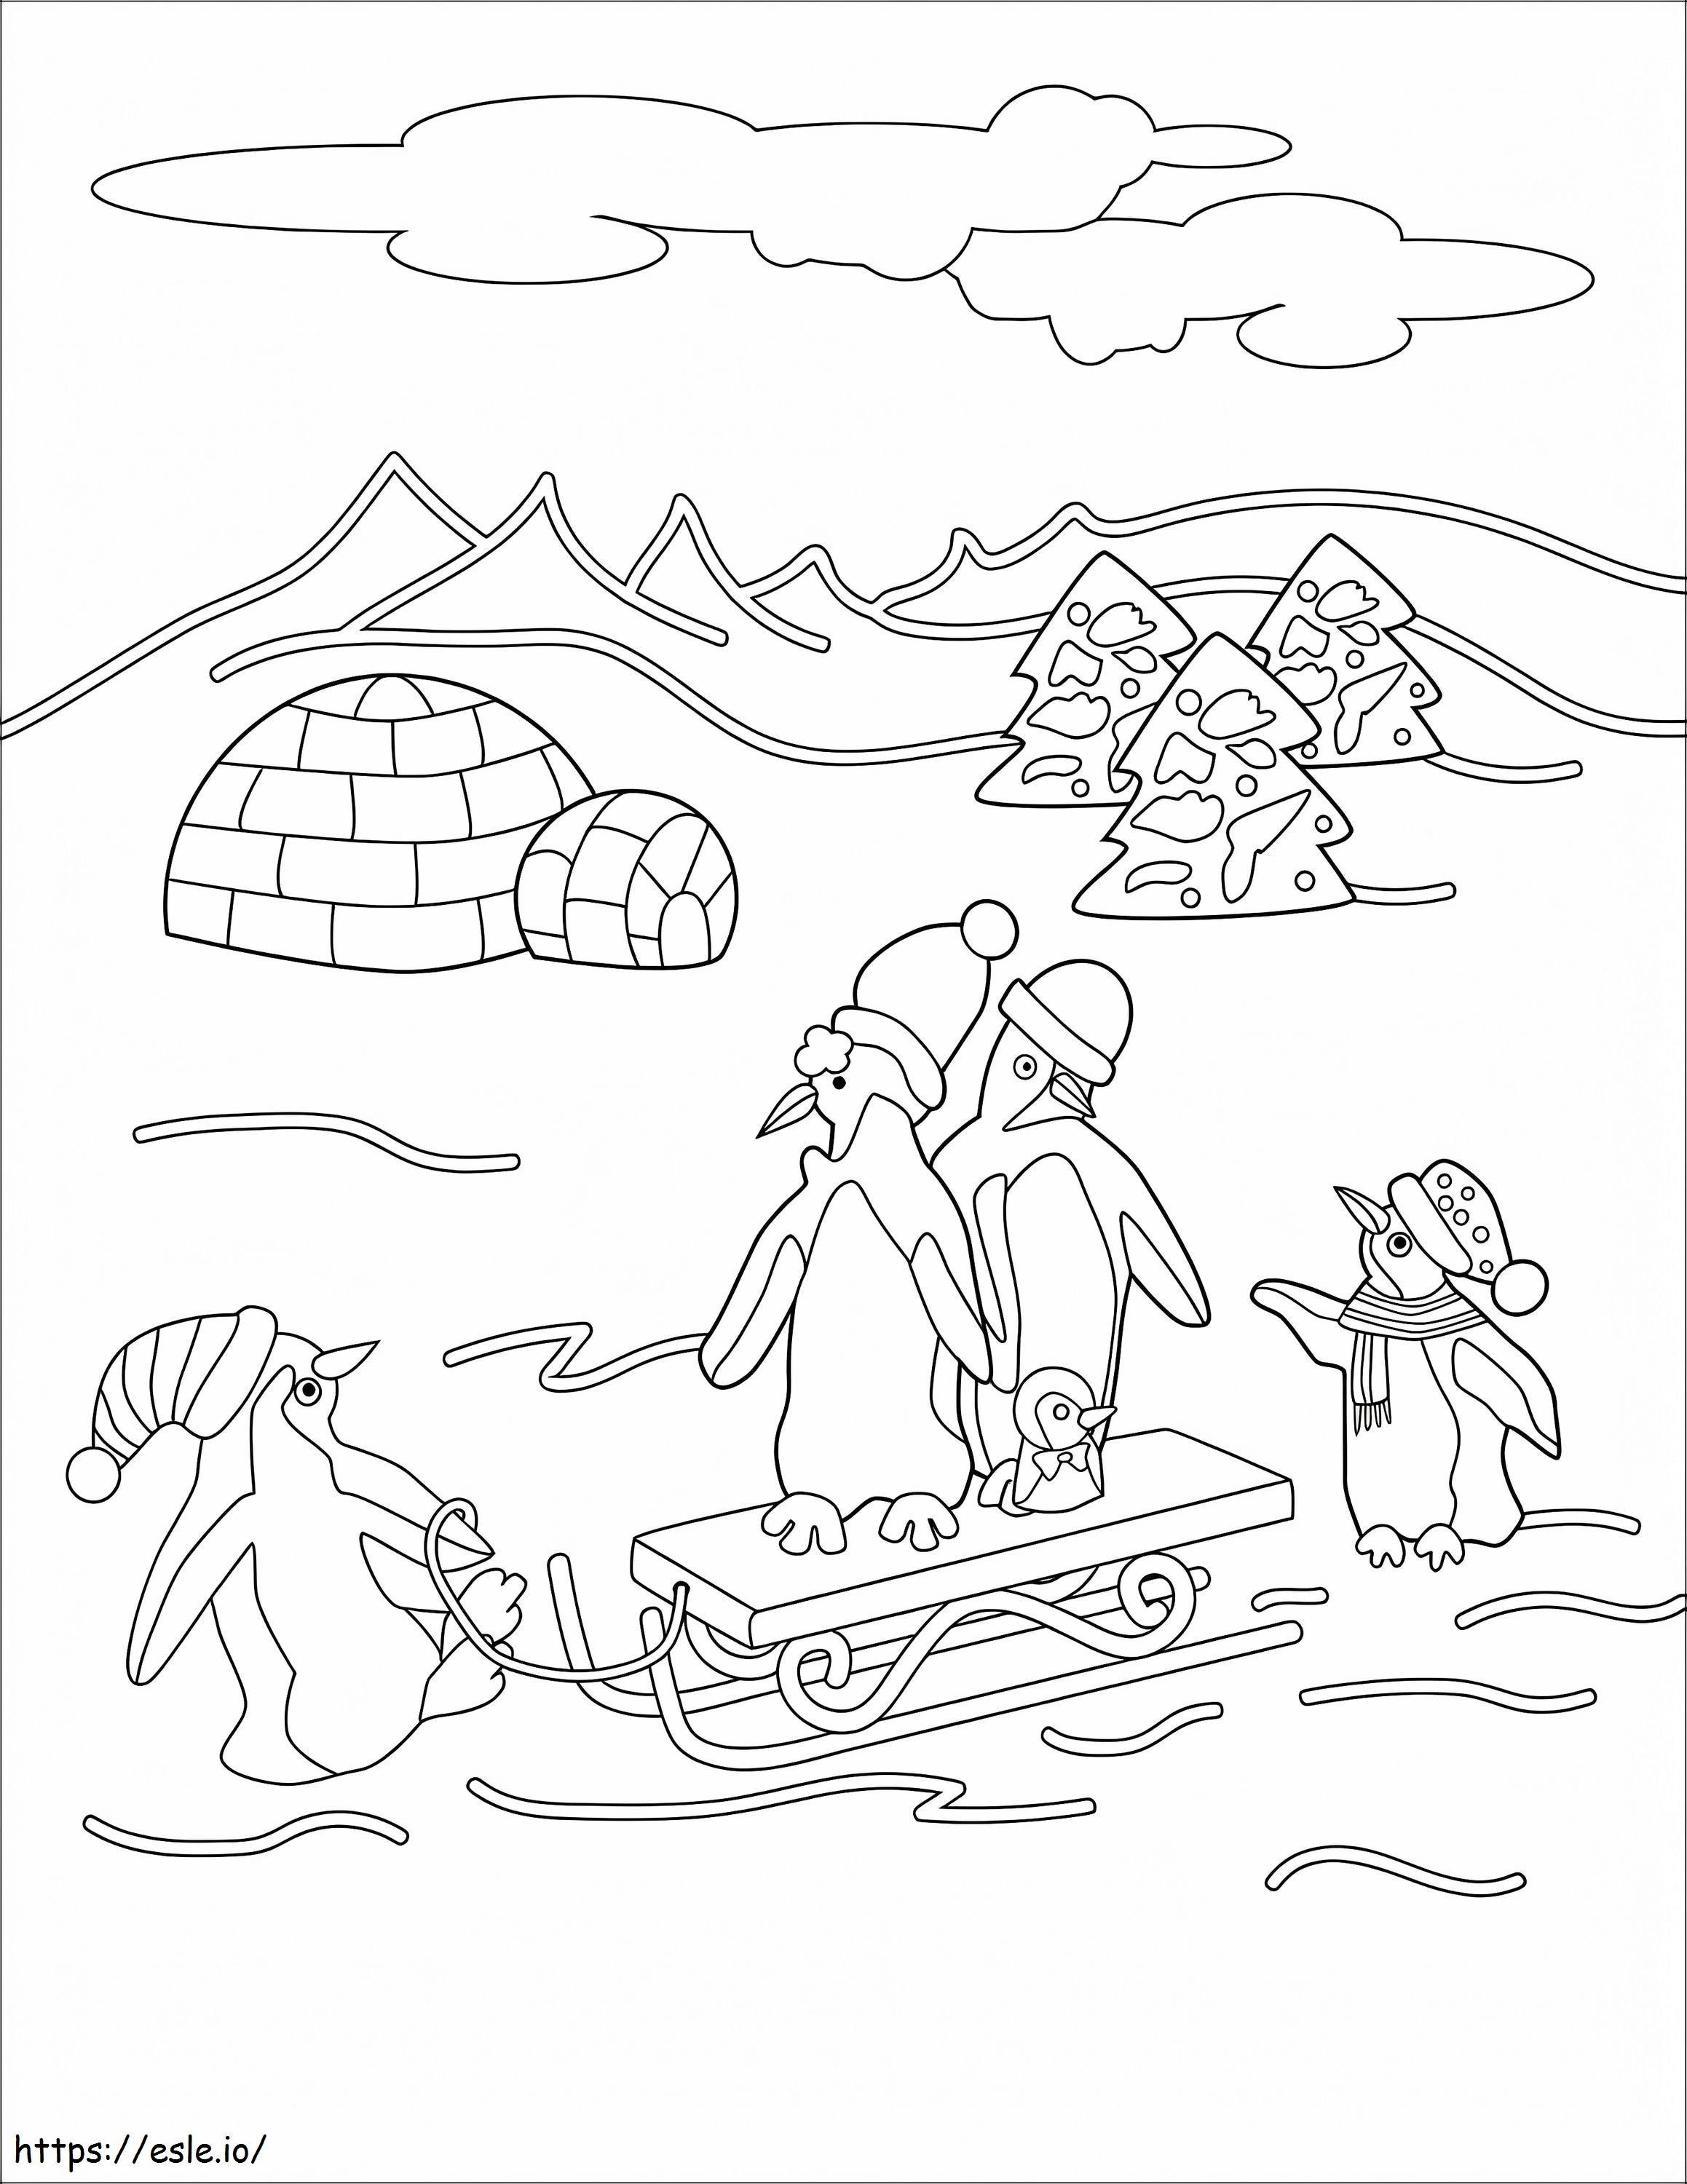 Adorable Christmas Penguins coloring page